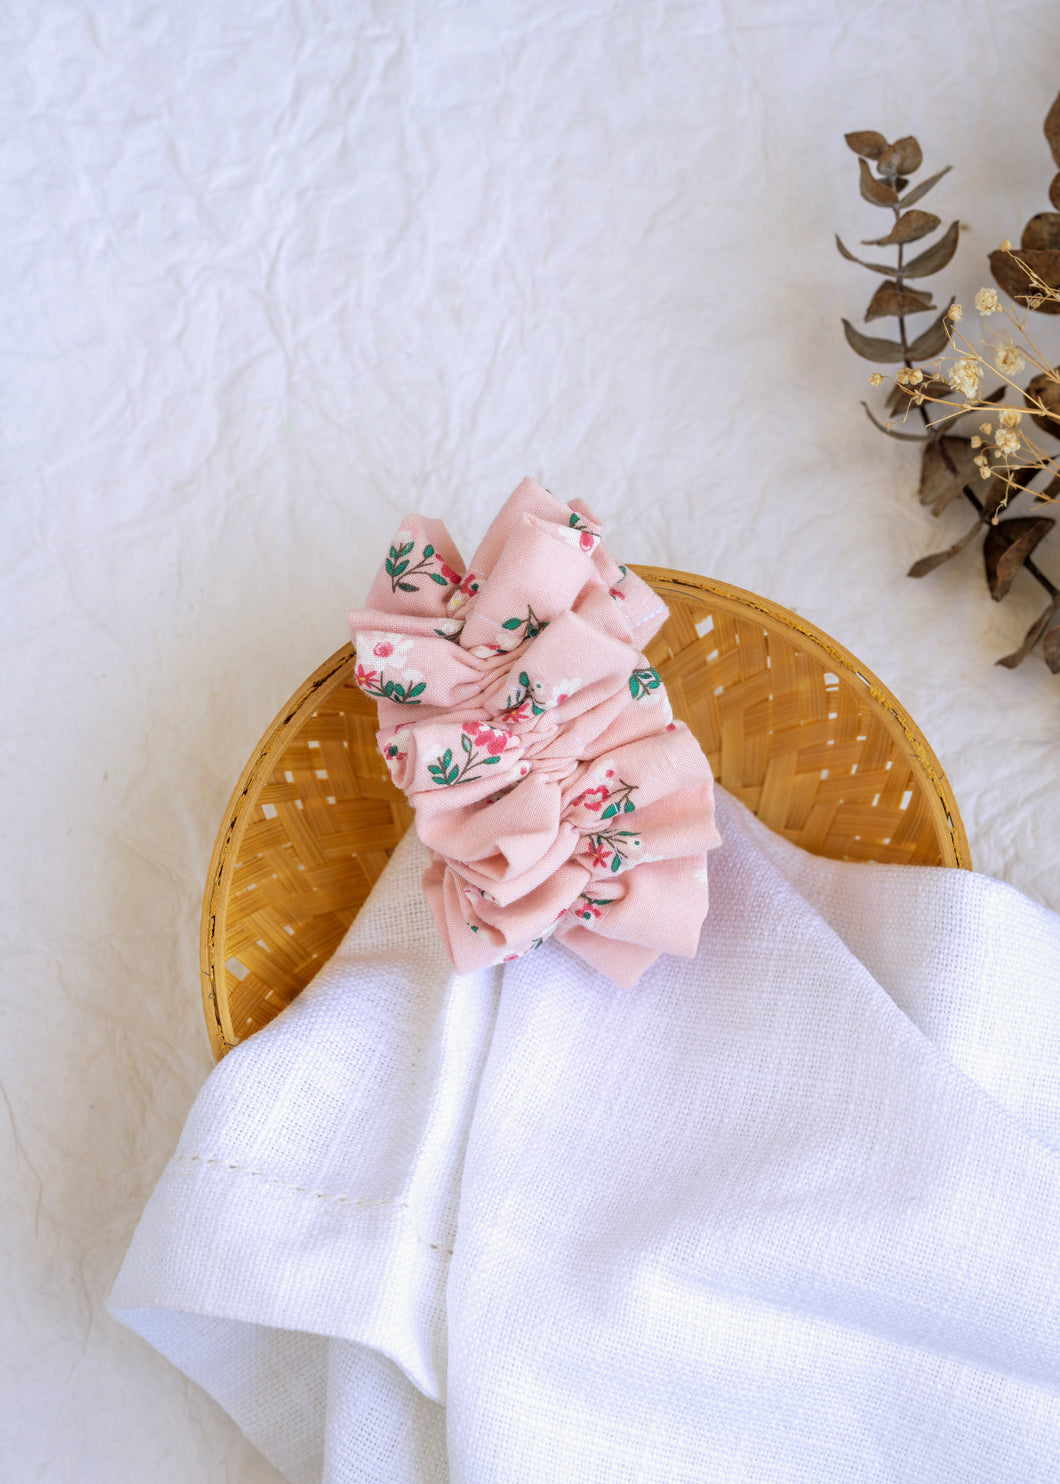 A hair accessory of Pink Floral Scrunchies placed in a wooden basket with a white cloth beneath, placed on a white background with some leaves and decoratives